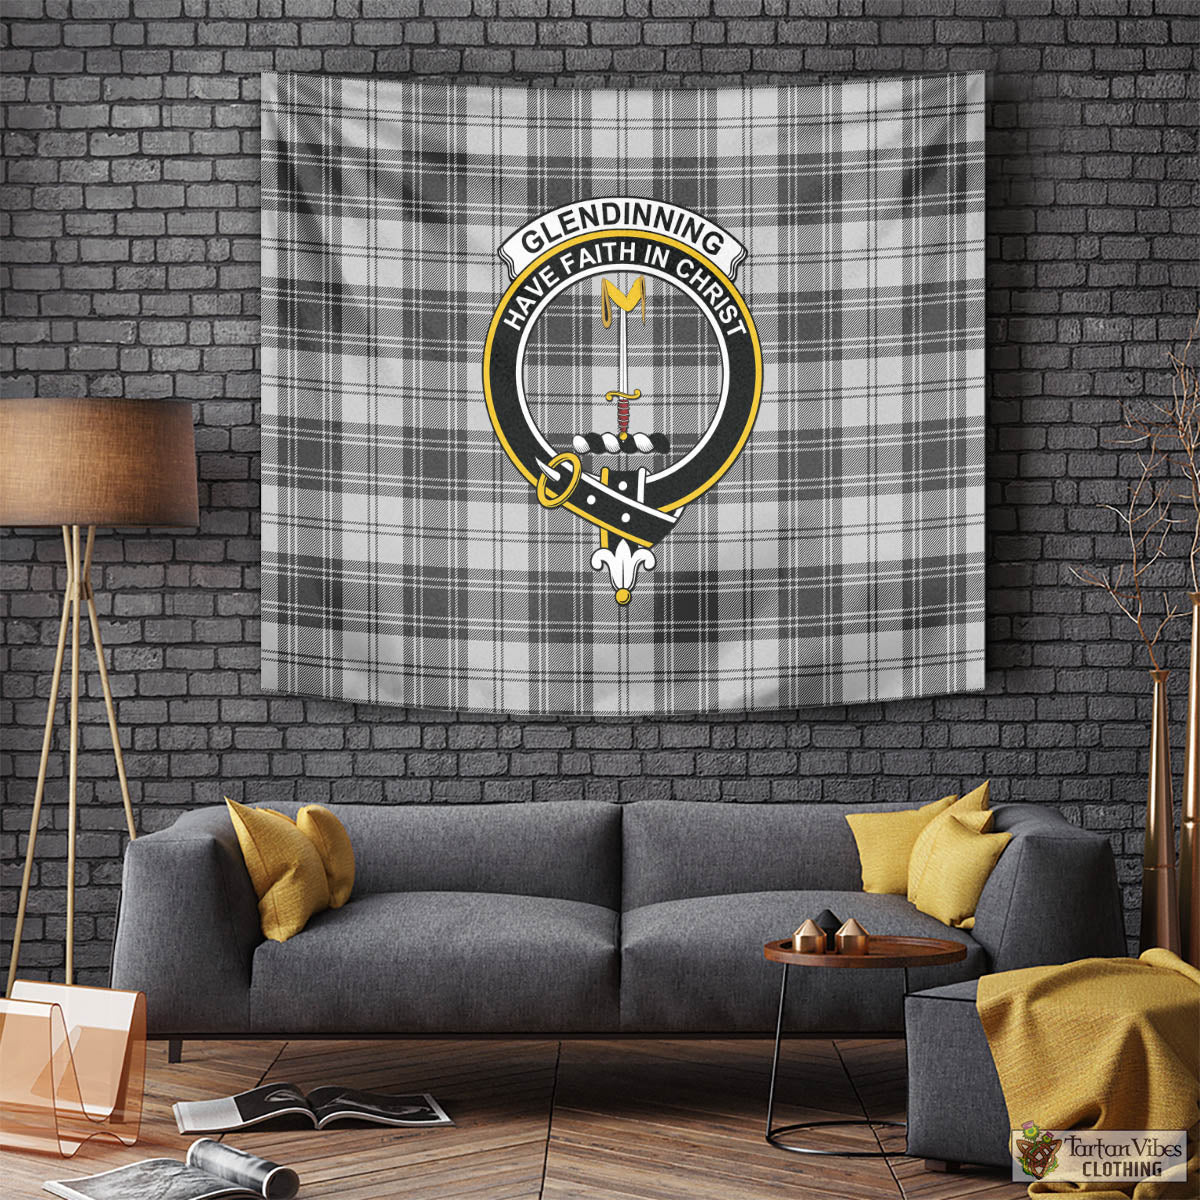 Tartan Vibes Clothing Glendinning Tartan Tapestry Wall Hanging and Home Decor for Room with Family Crest